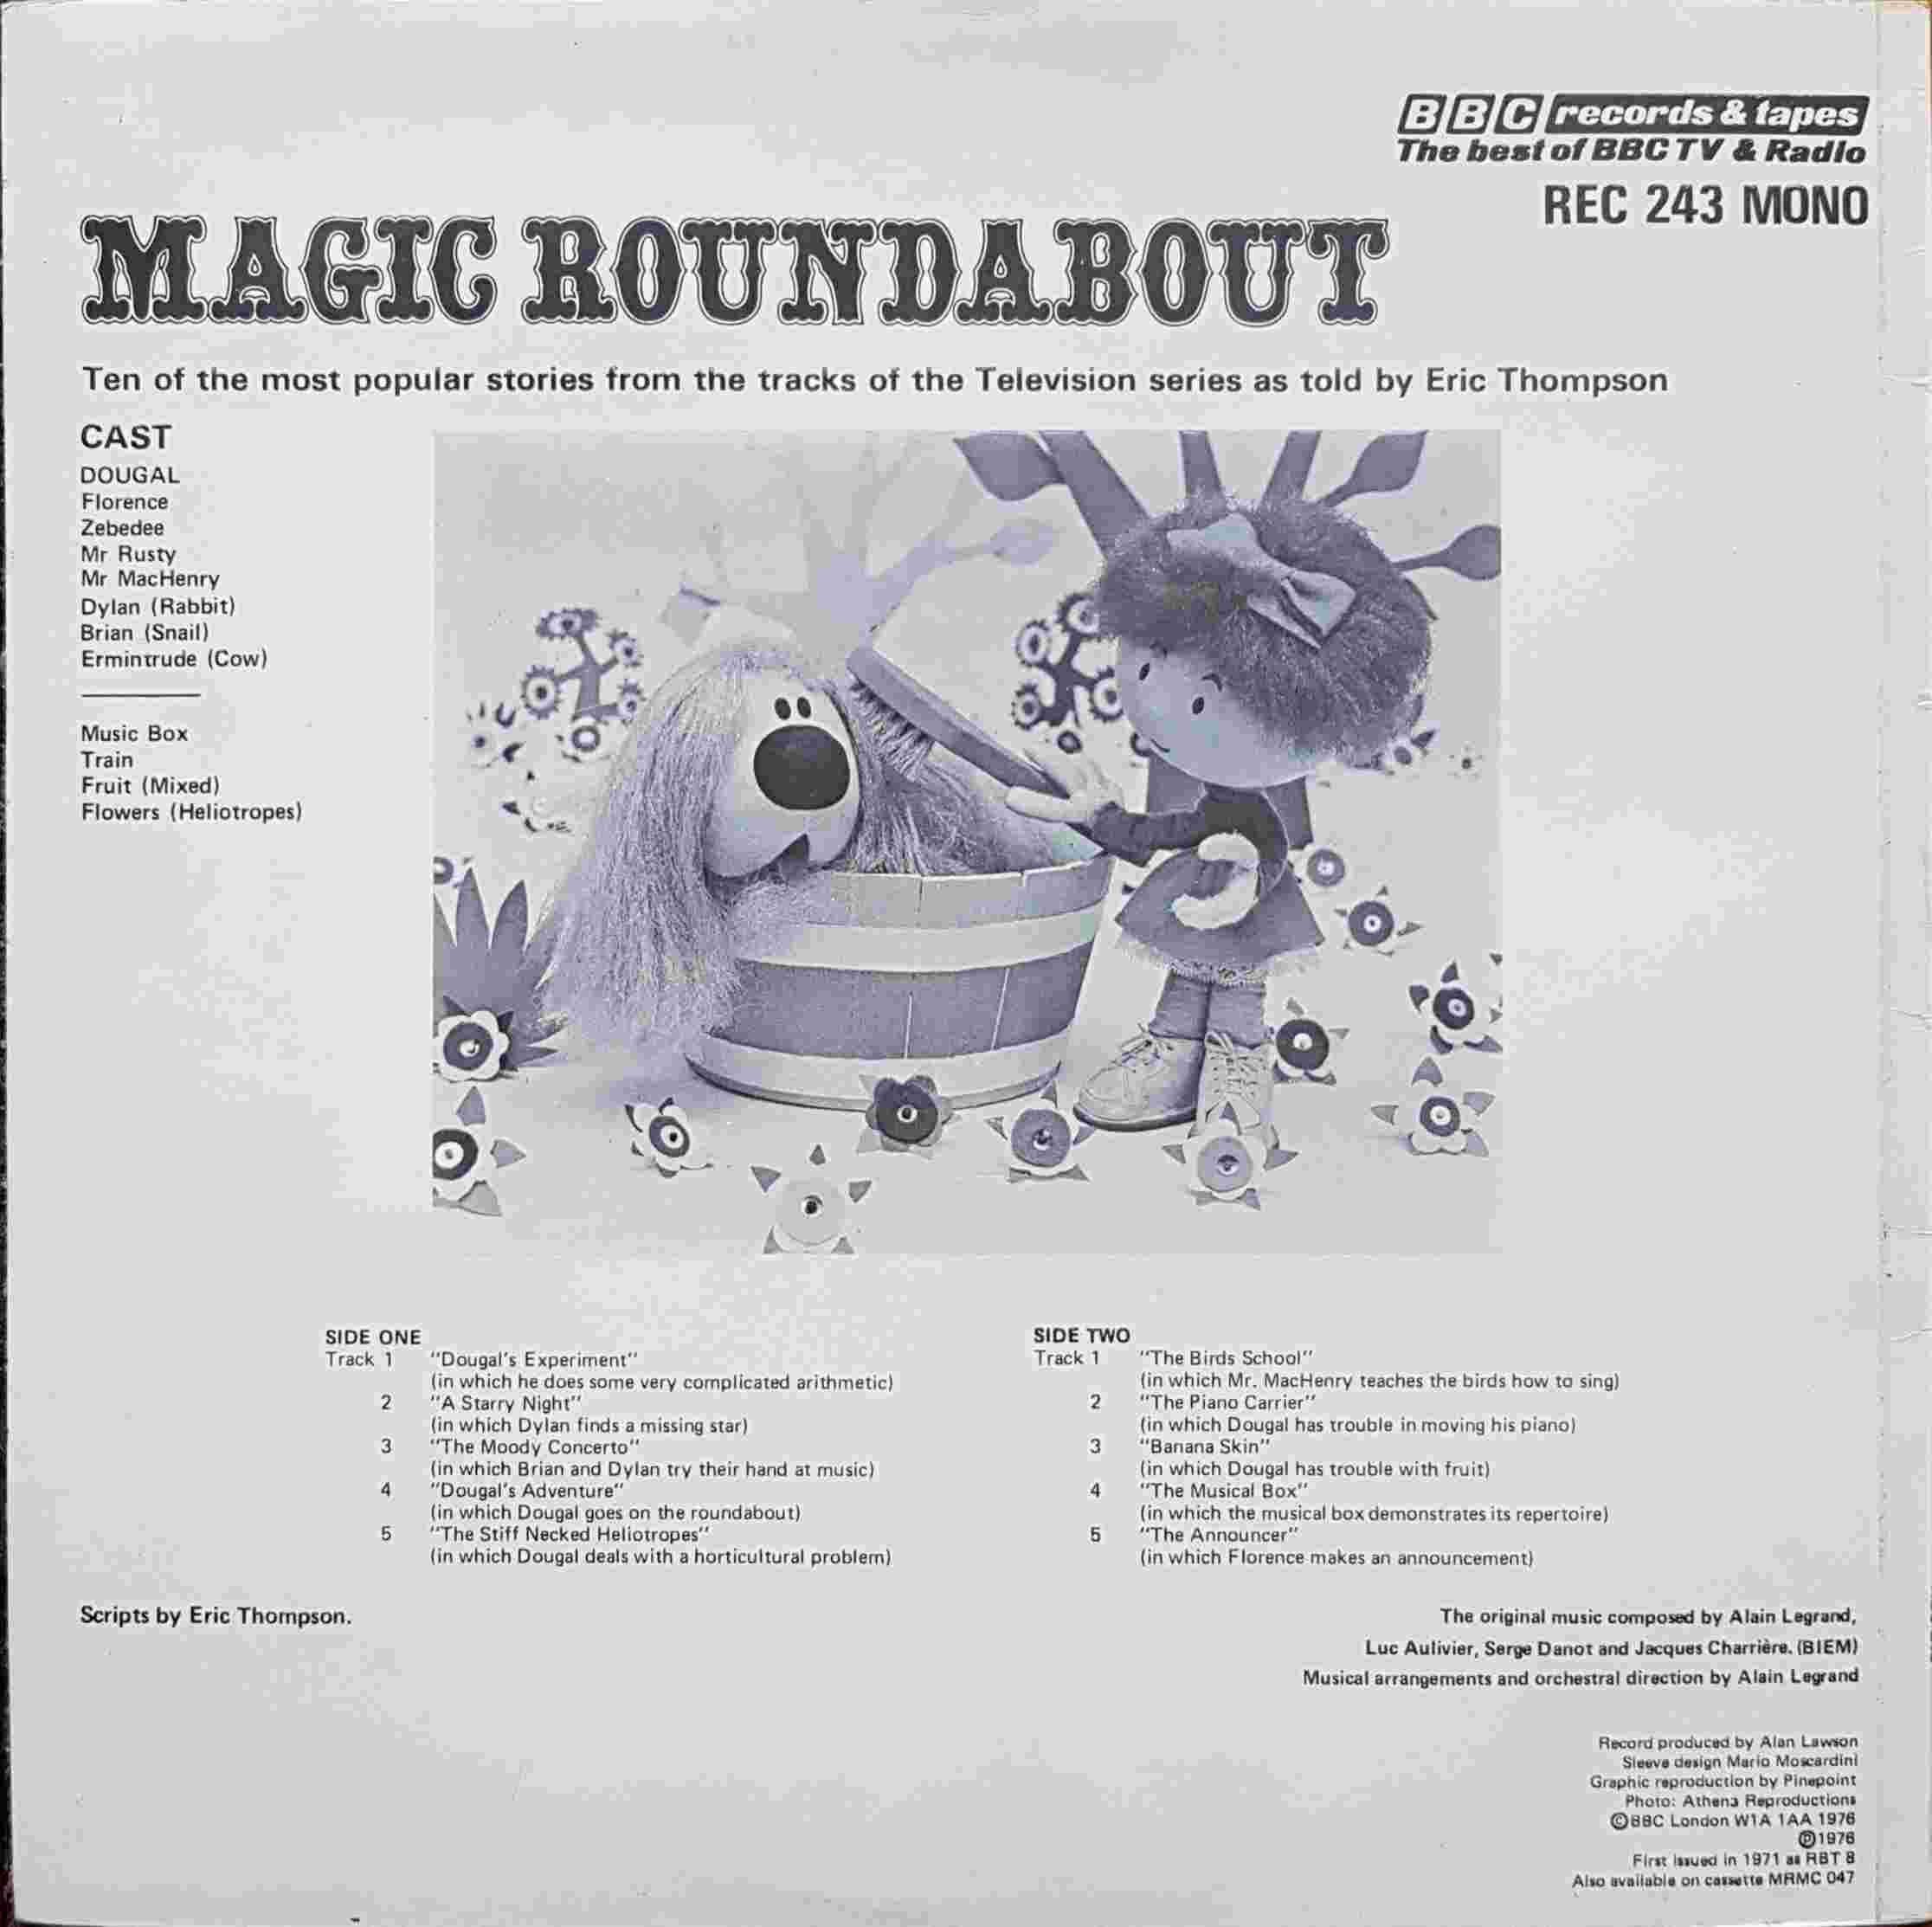 Picture of REC 243 The magic roundabout by artist Eric Thompson from the BBC records and Tapes library